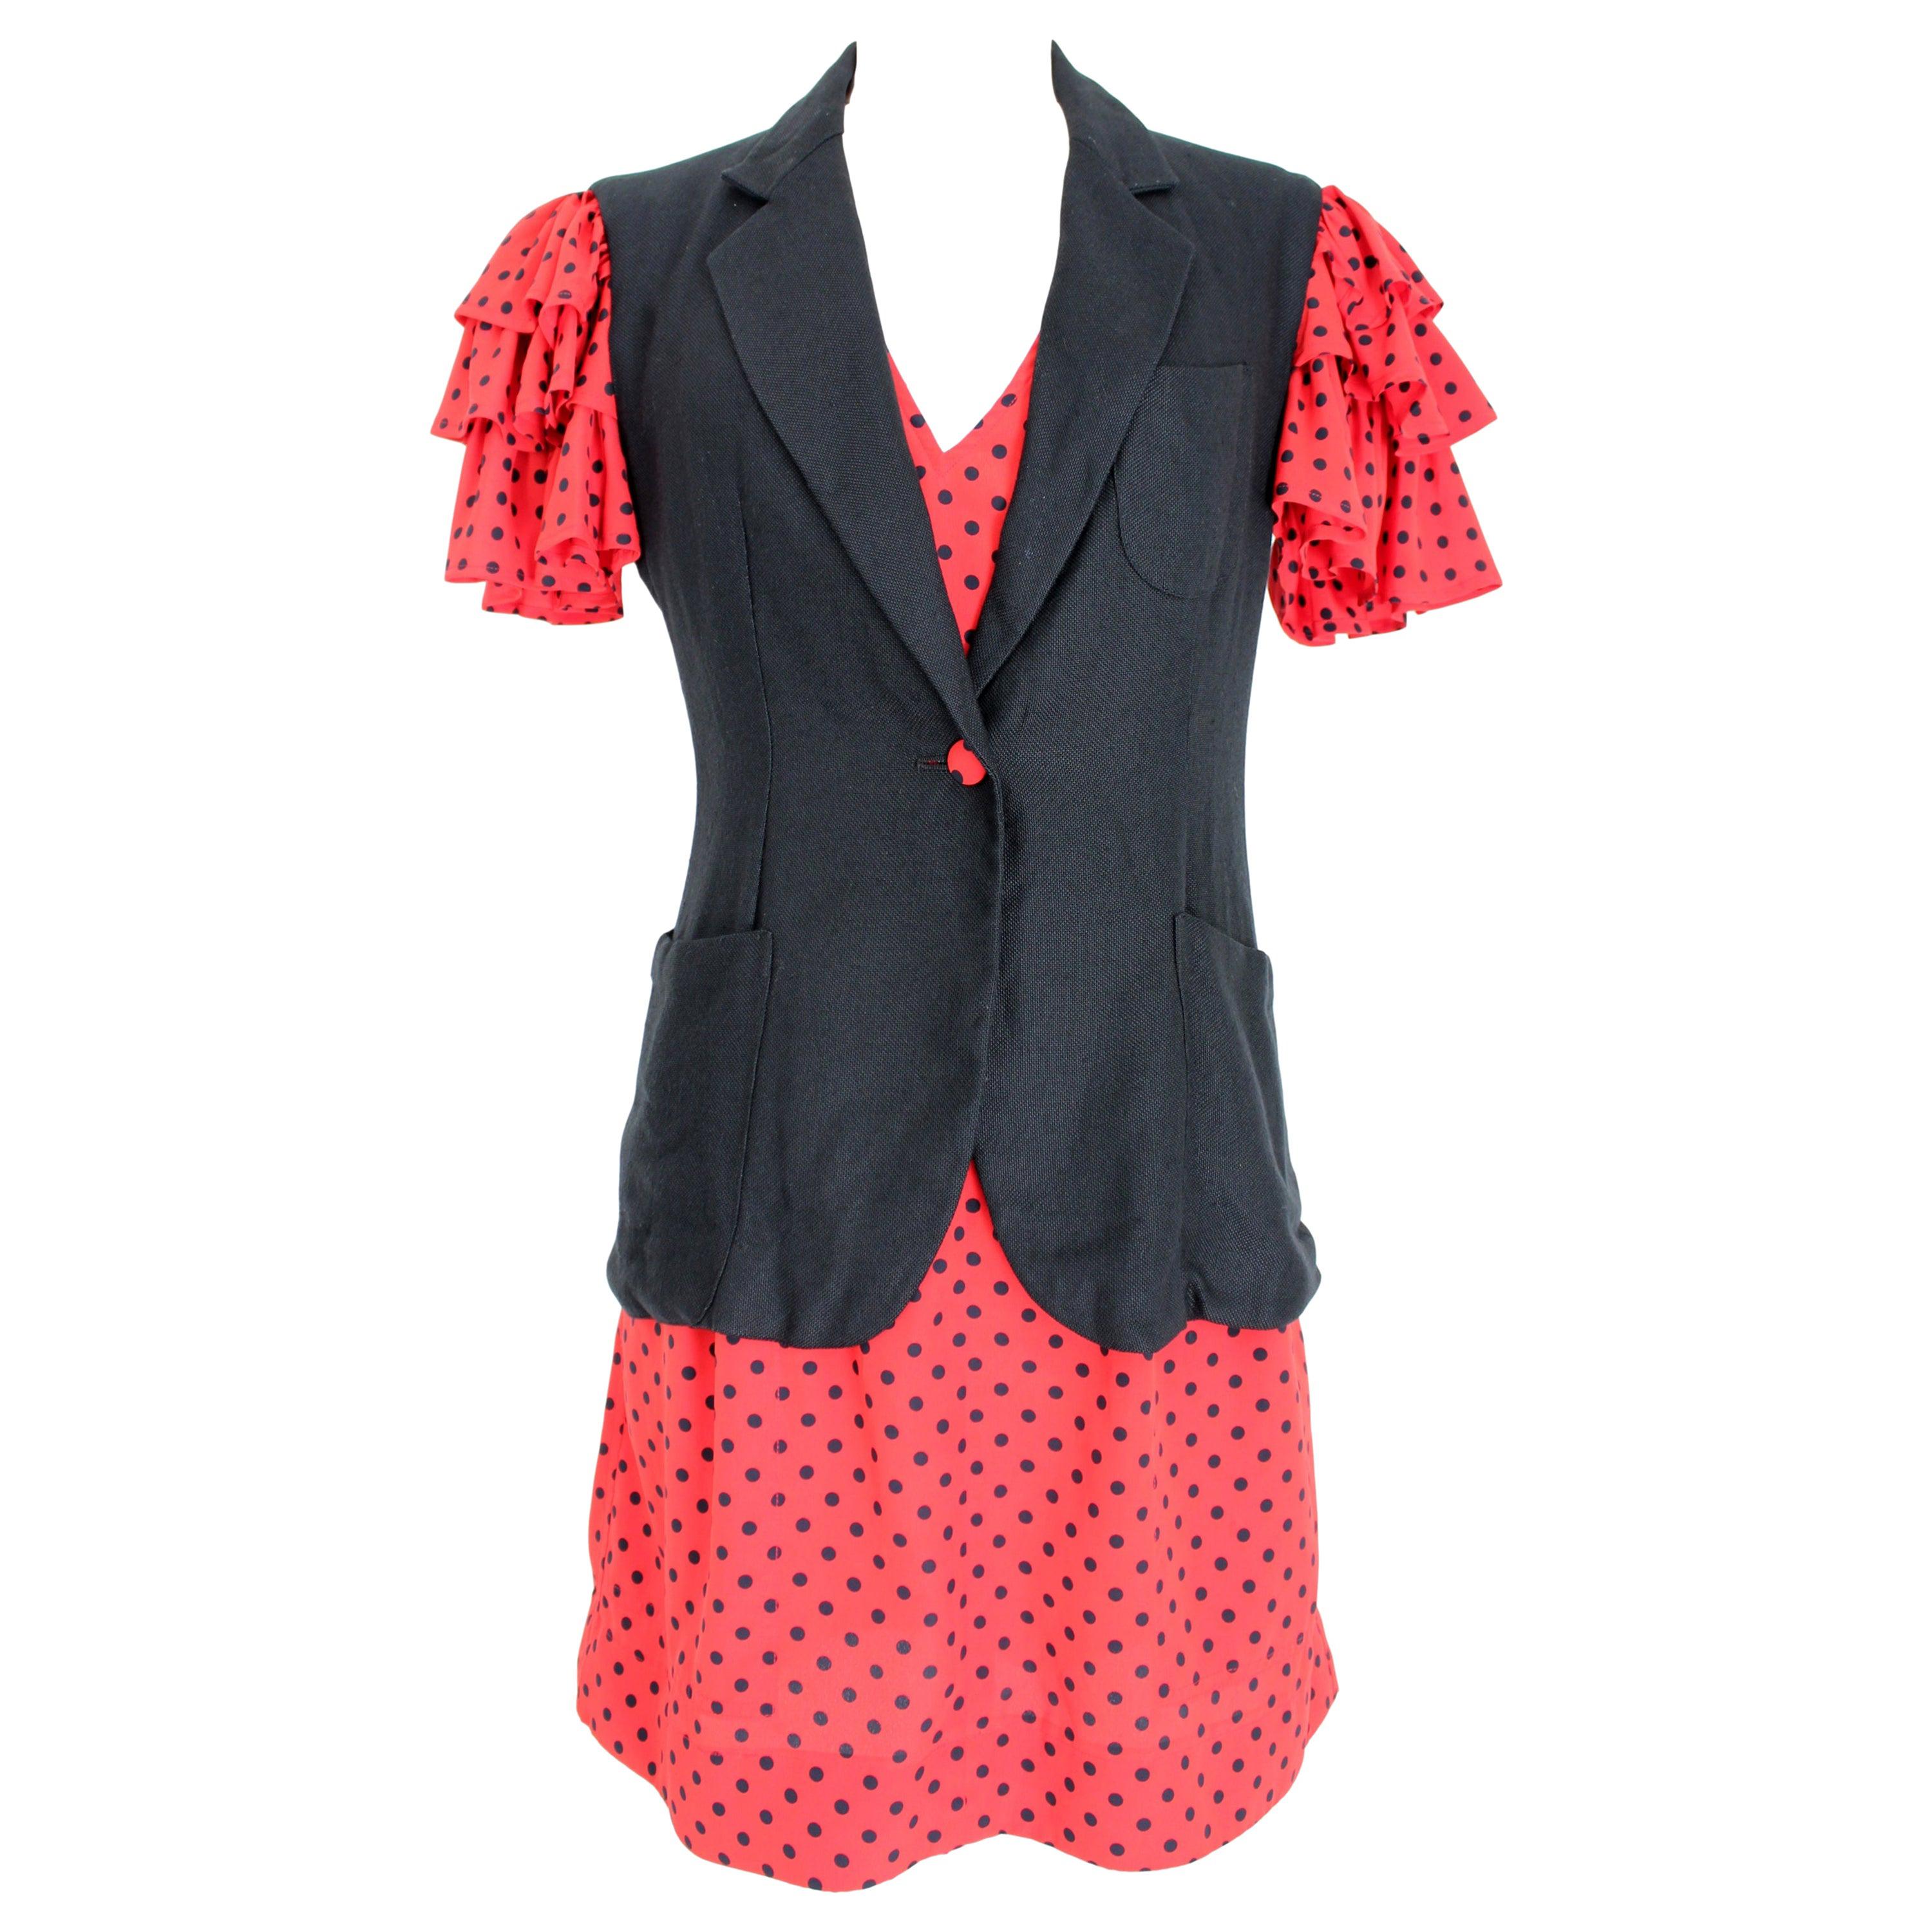 Moschino Red Black Polka Dot Cocktail Jacket and Dress Set 1990s Vintage